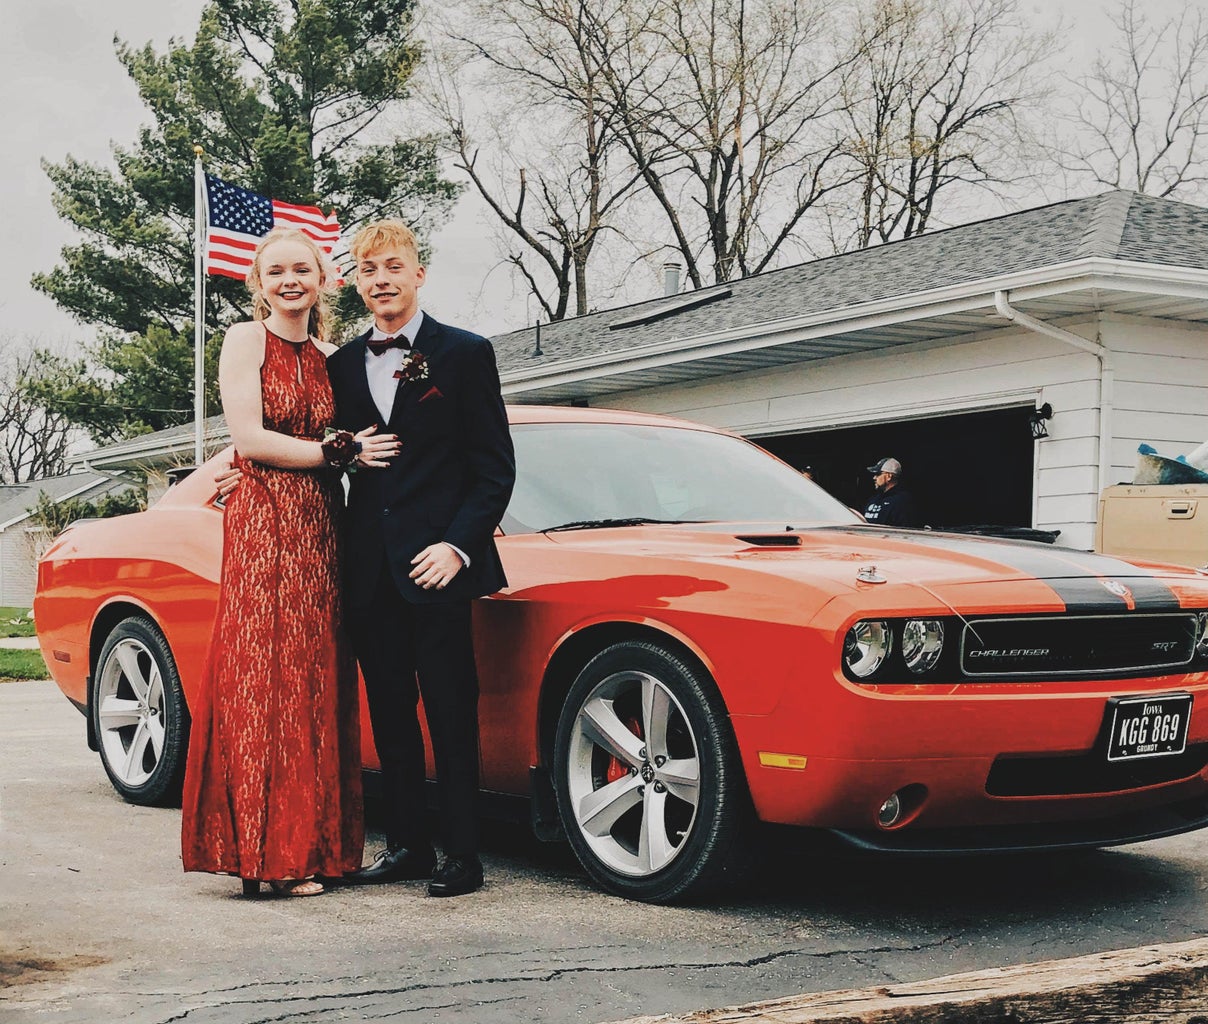 Brianna Strohbehn in her red Prom dress next to her boyfriend and a red vehicle.